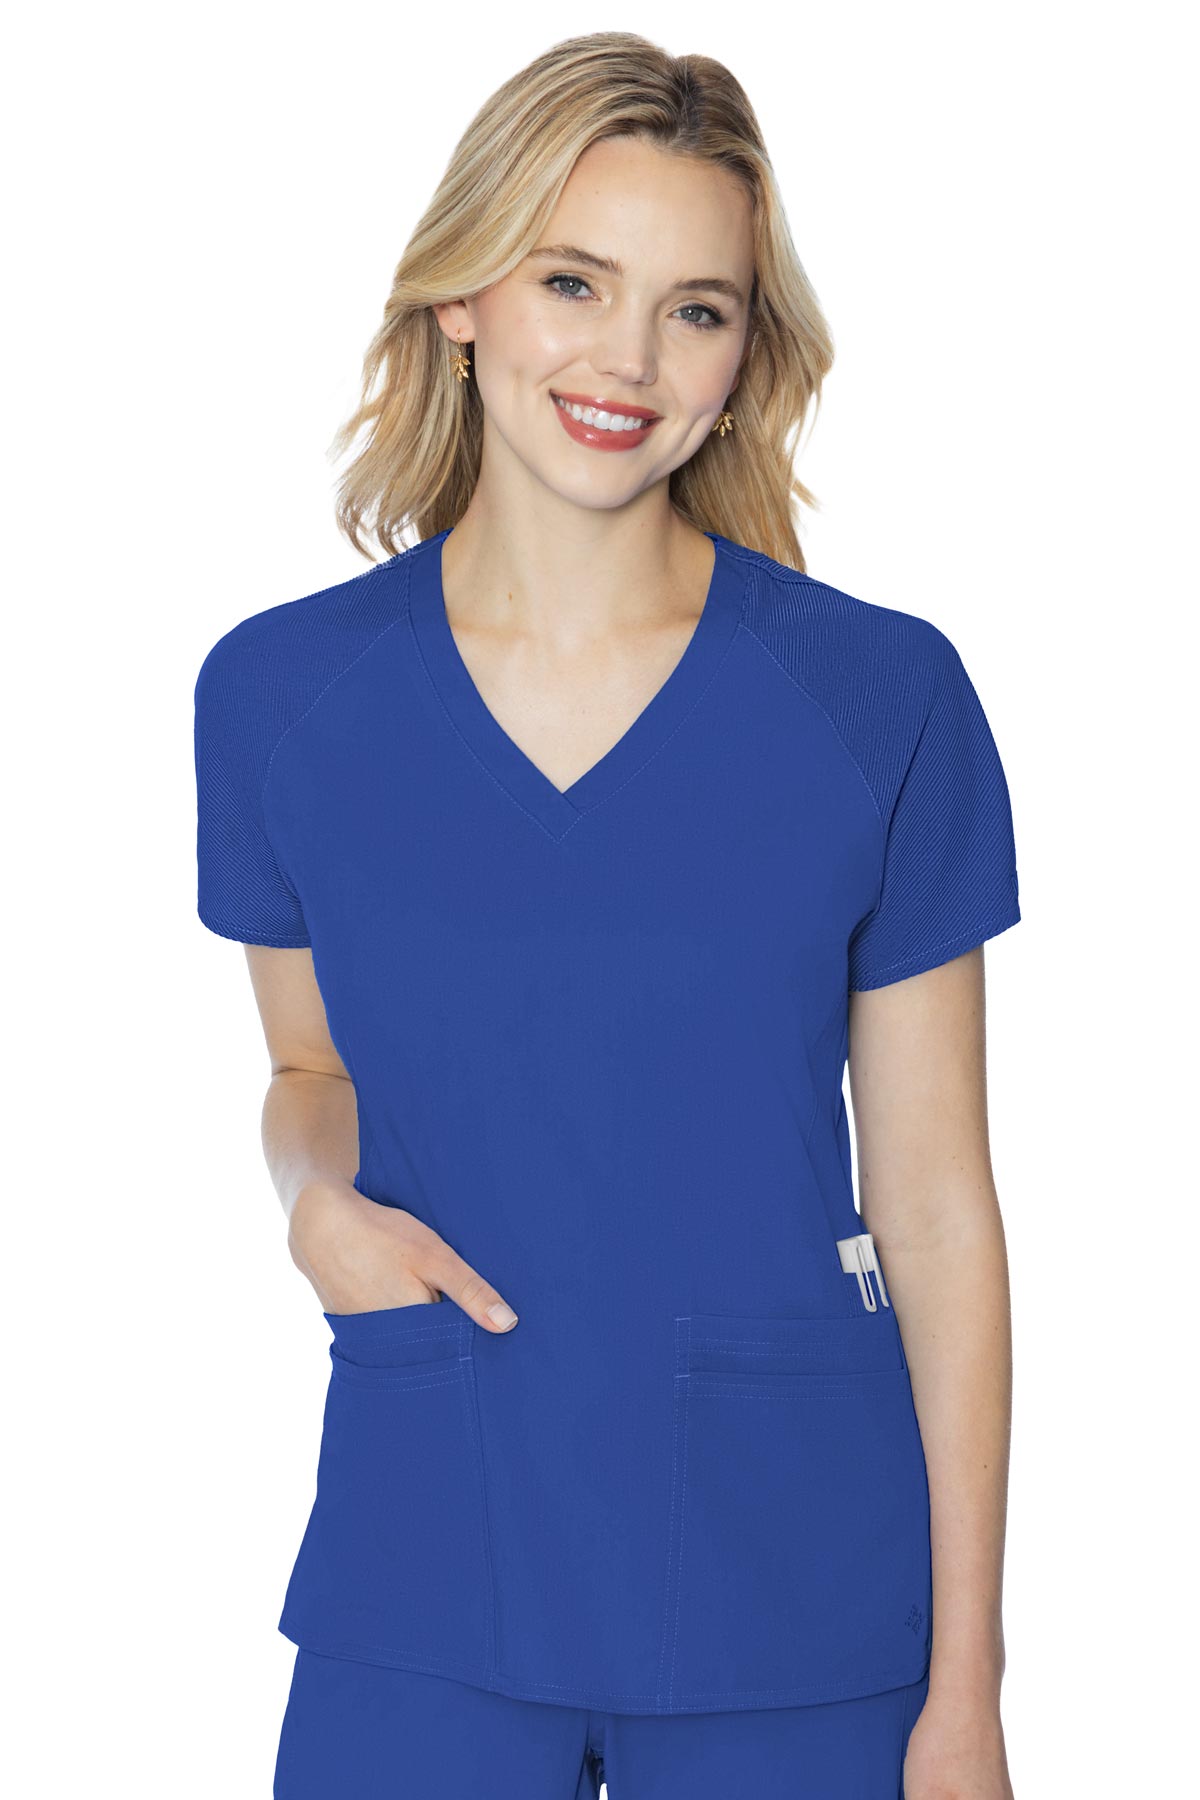 Med Couture Scrub Top Touch Raglan Sleeve in royal at Parker's Clothing and Shoes.